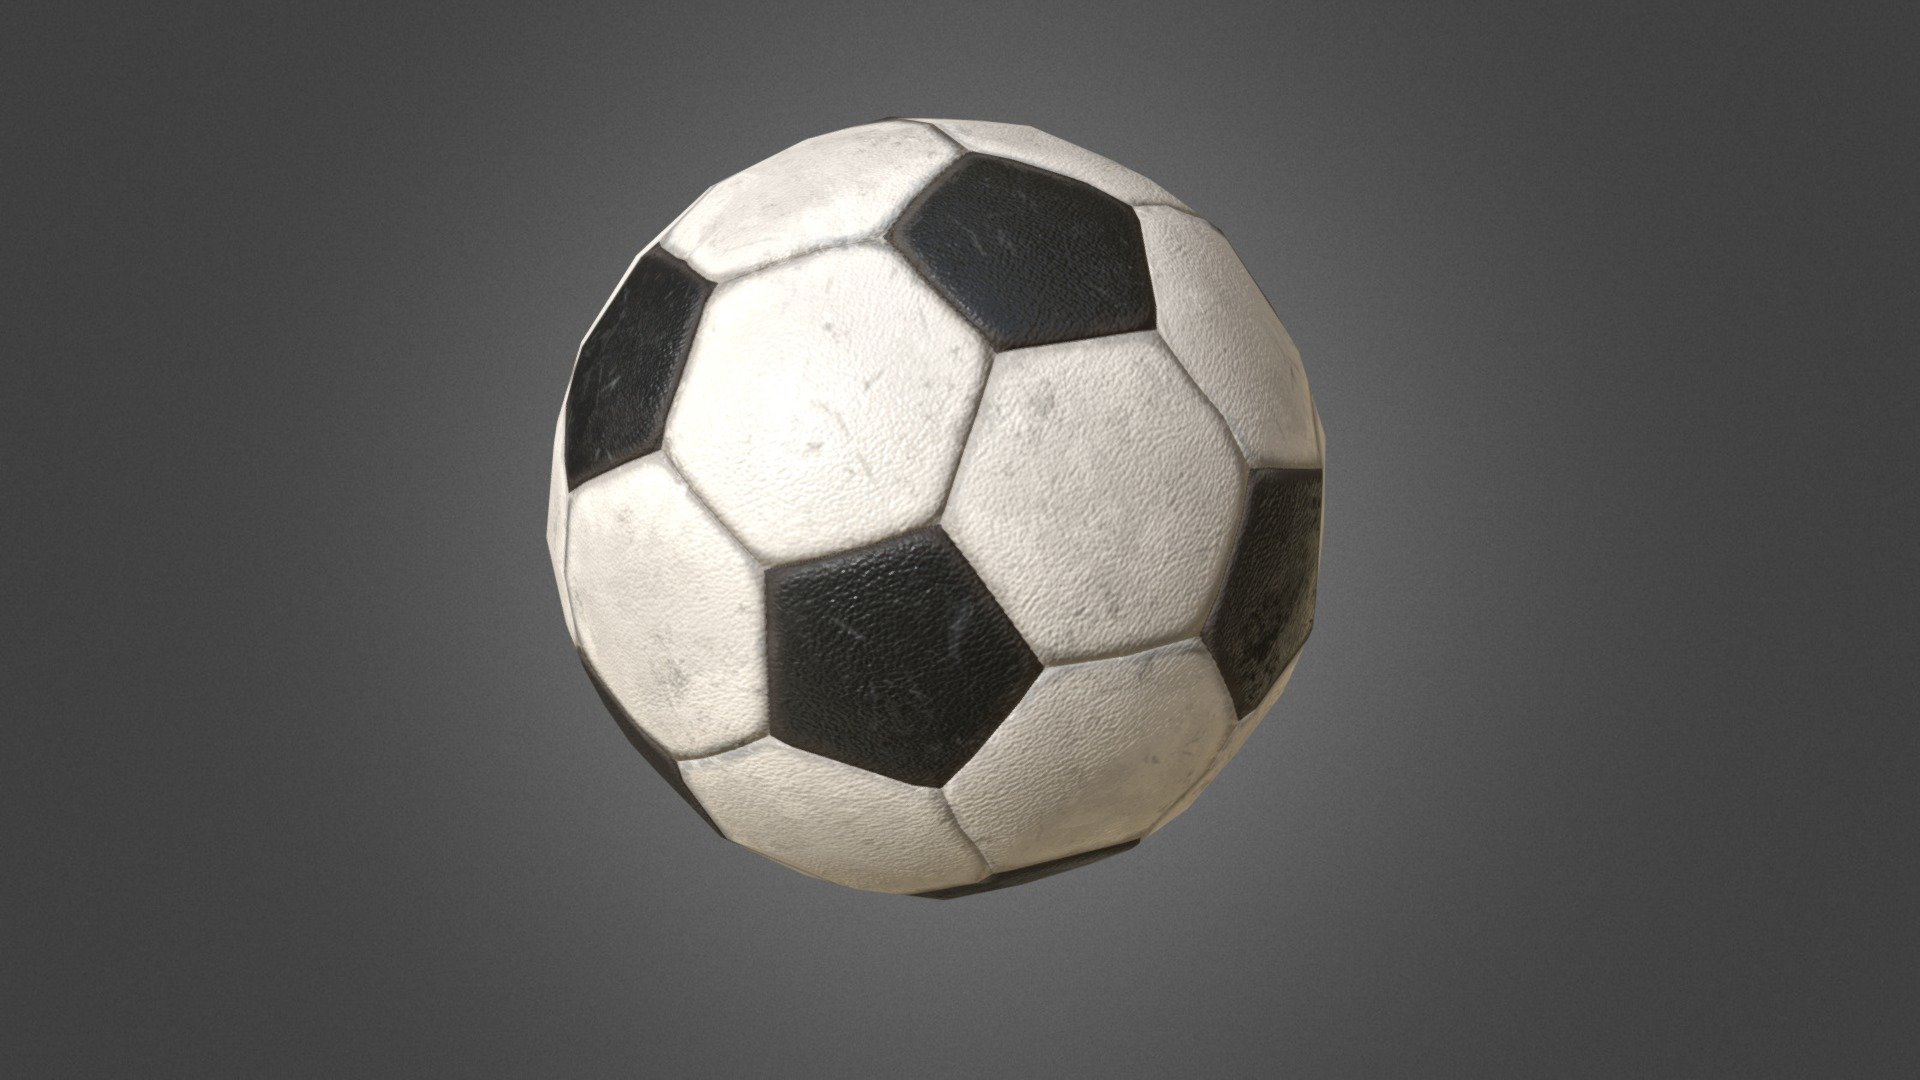 Low poly, PBR, game ready 3D model of Used Football Ball FBX format Texture Size: 2048x2048 - Used Football Ball Low Poly PBR Model - 3D model by AleksandrKorostyliov 3d model